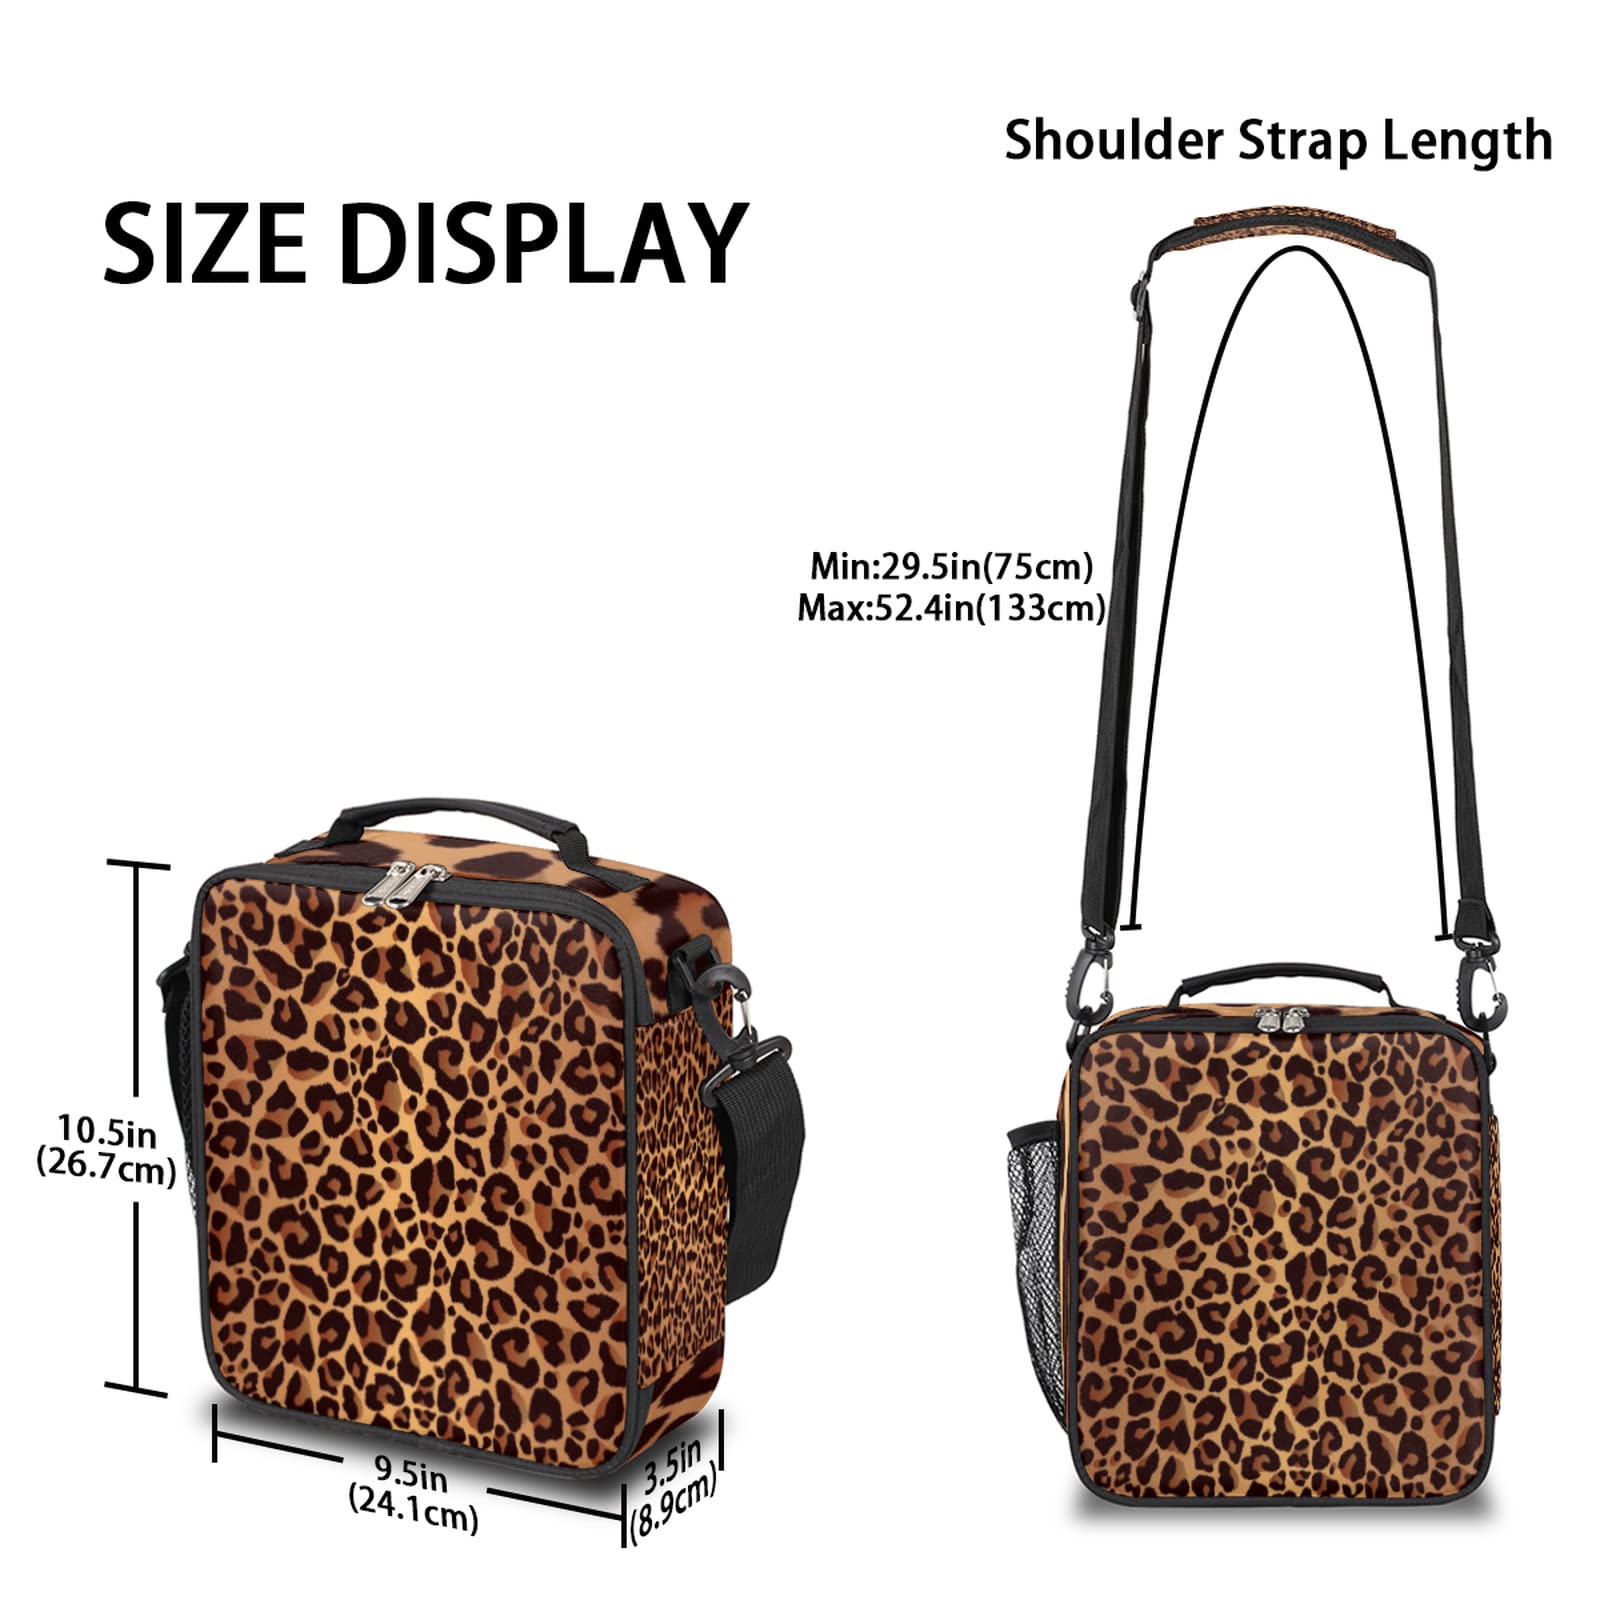 Giraffe Animal Print Pattern Insulated Lunch Bag Durable Lunch Box with Bottle Holder 10.5*3.5*9.5 Inch for Work Adults Men Women Kids